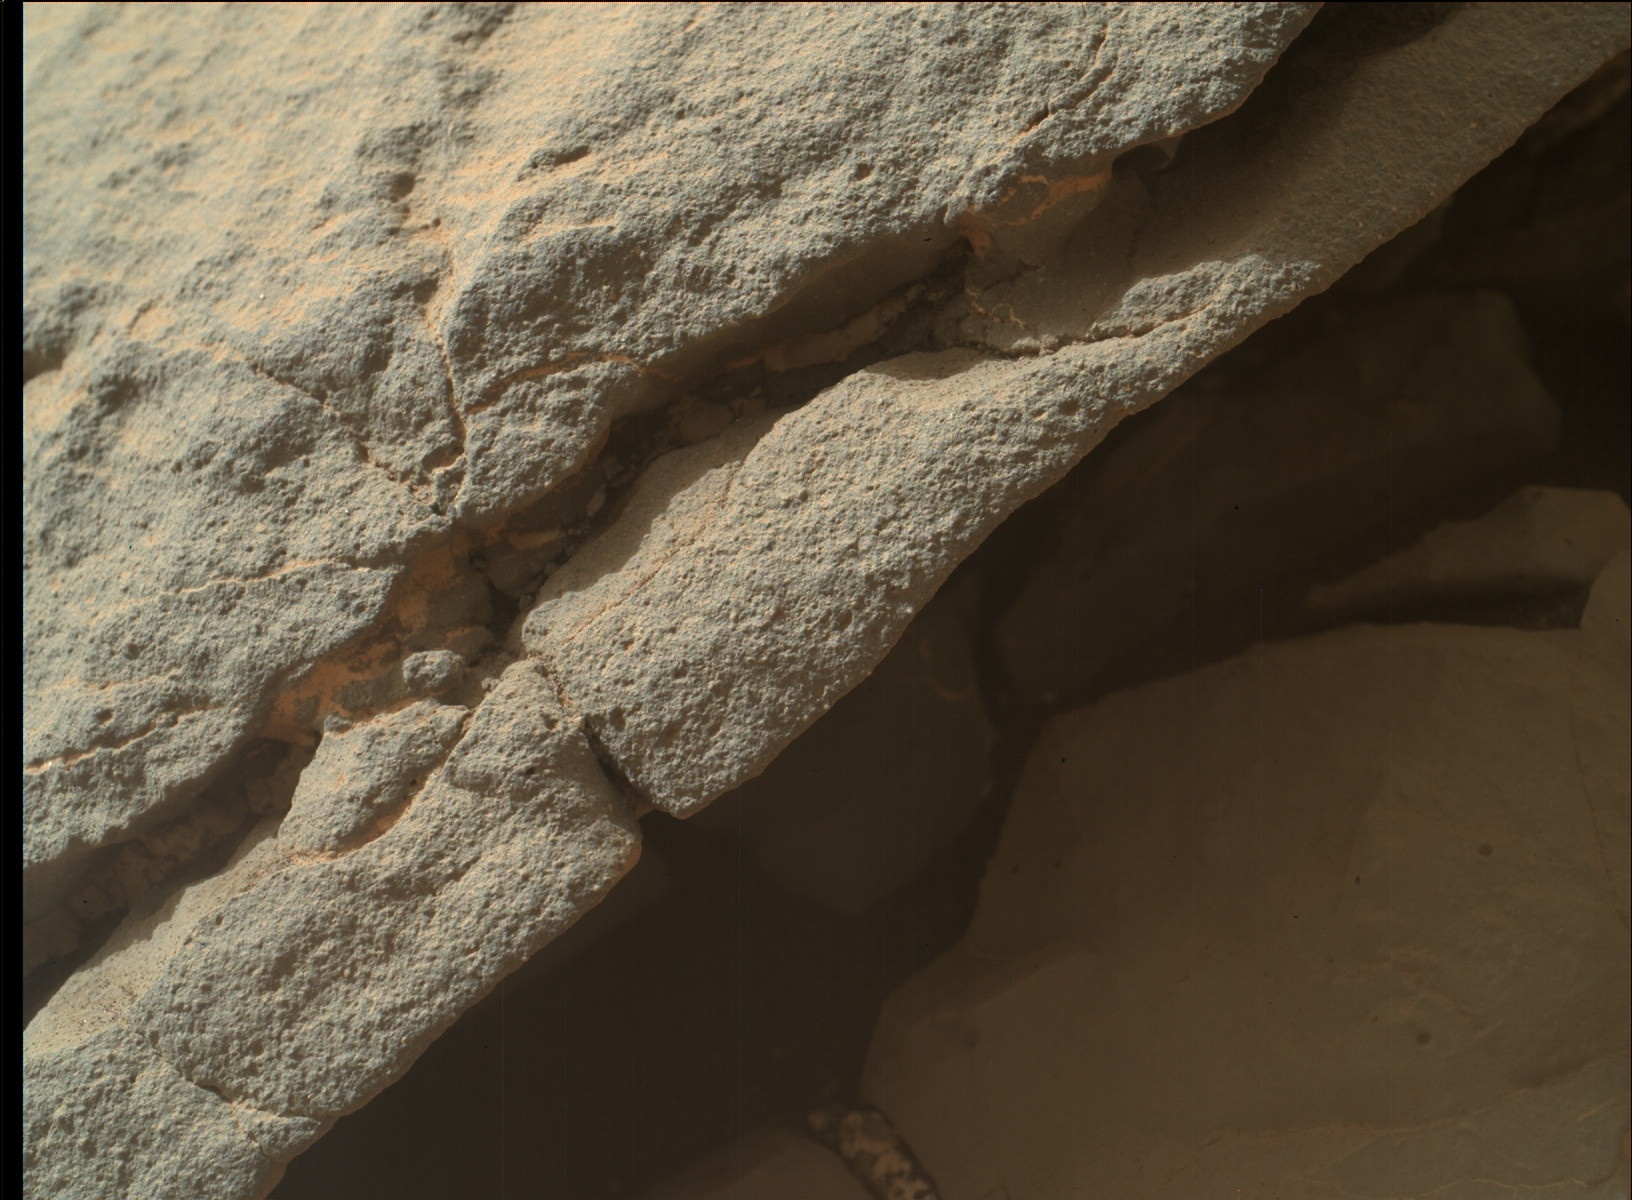 Nasa's Mars rover Curiosity acquired this image using its Mars Hand Lens Imager (MAHLI) on Sol 158